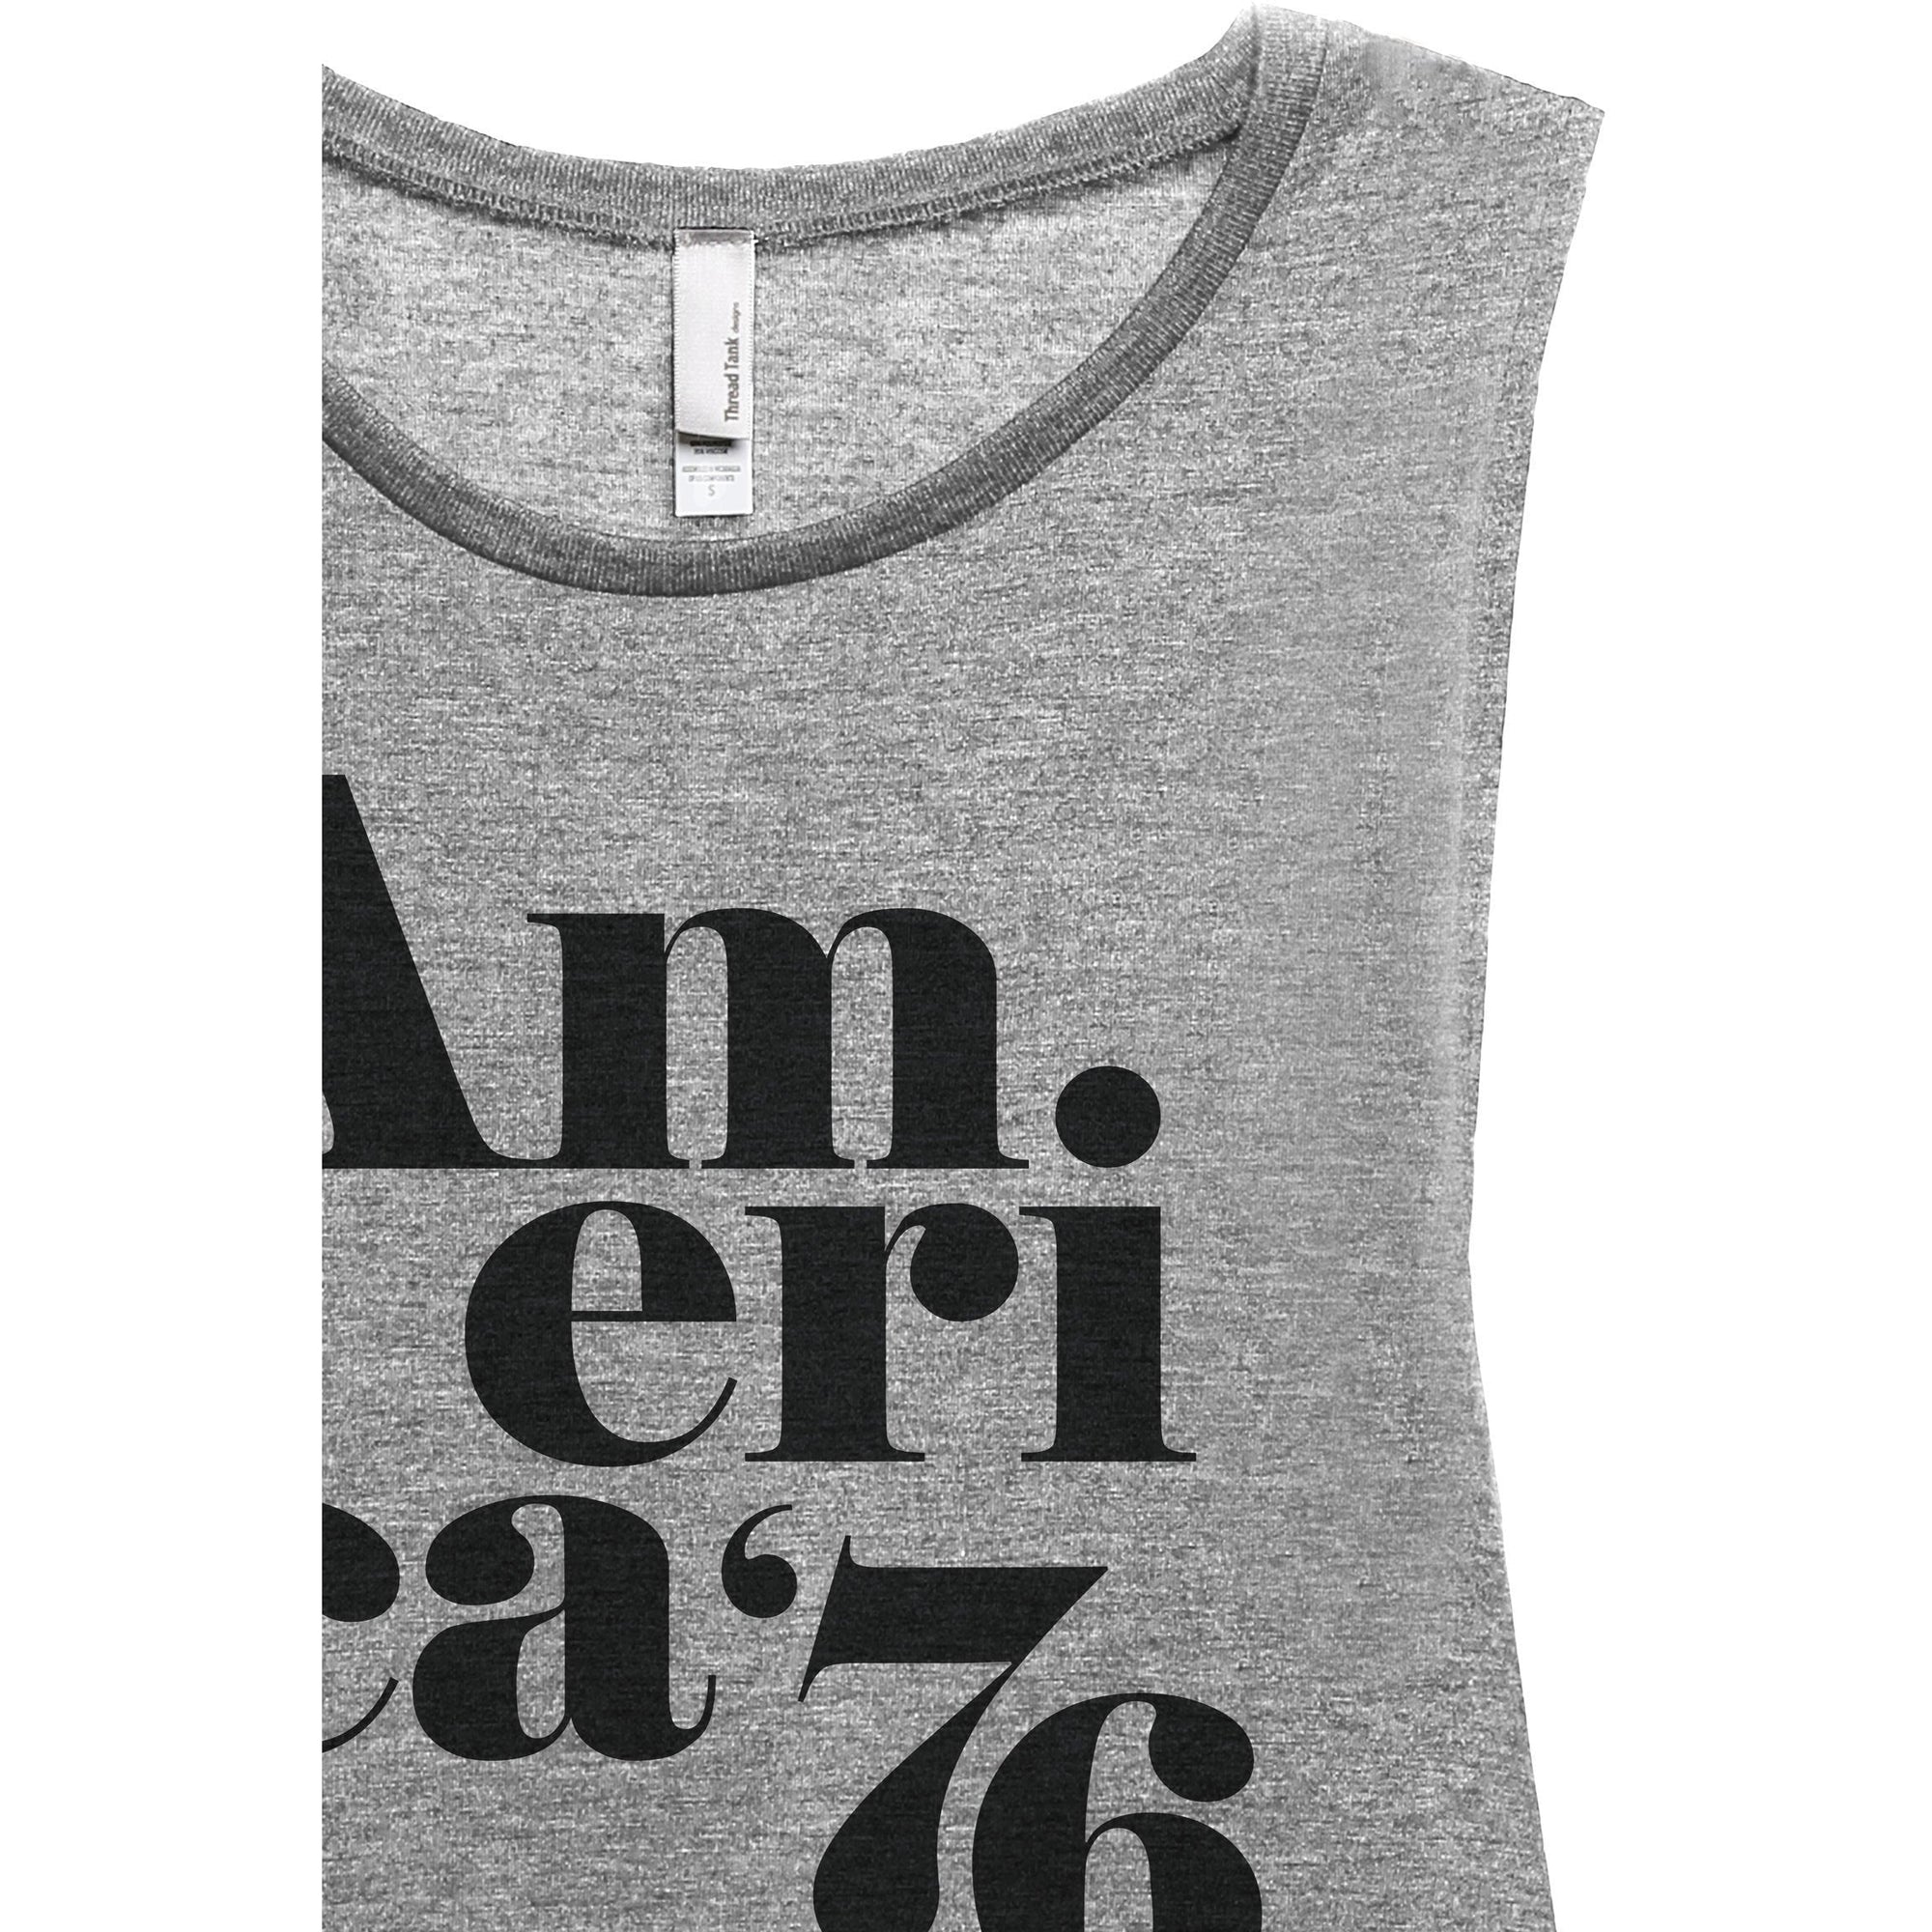 America - Stories You Can Wear